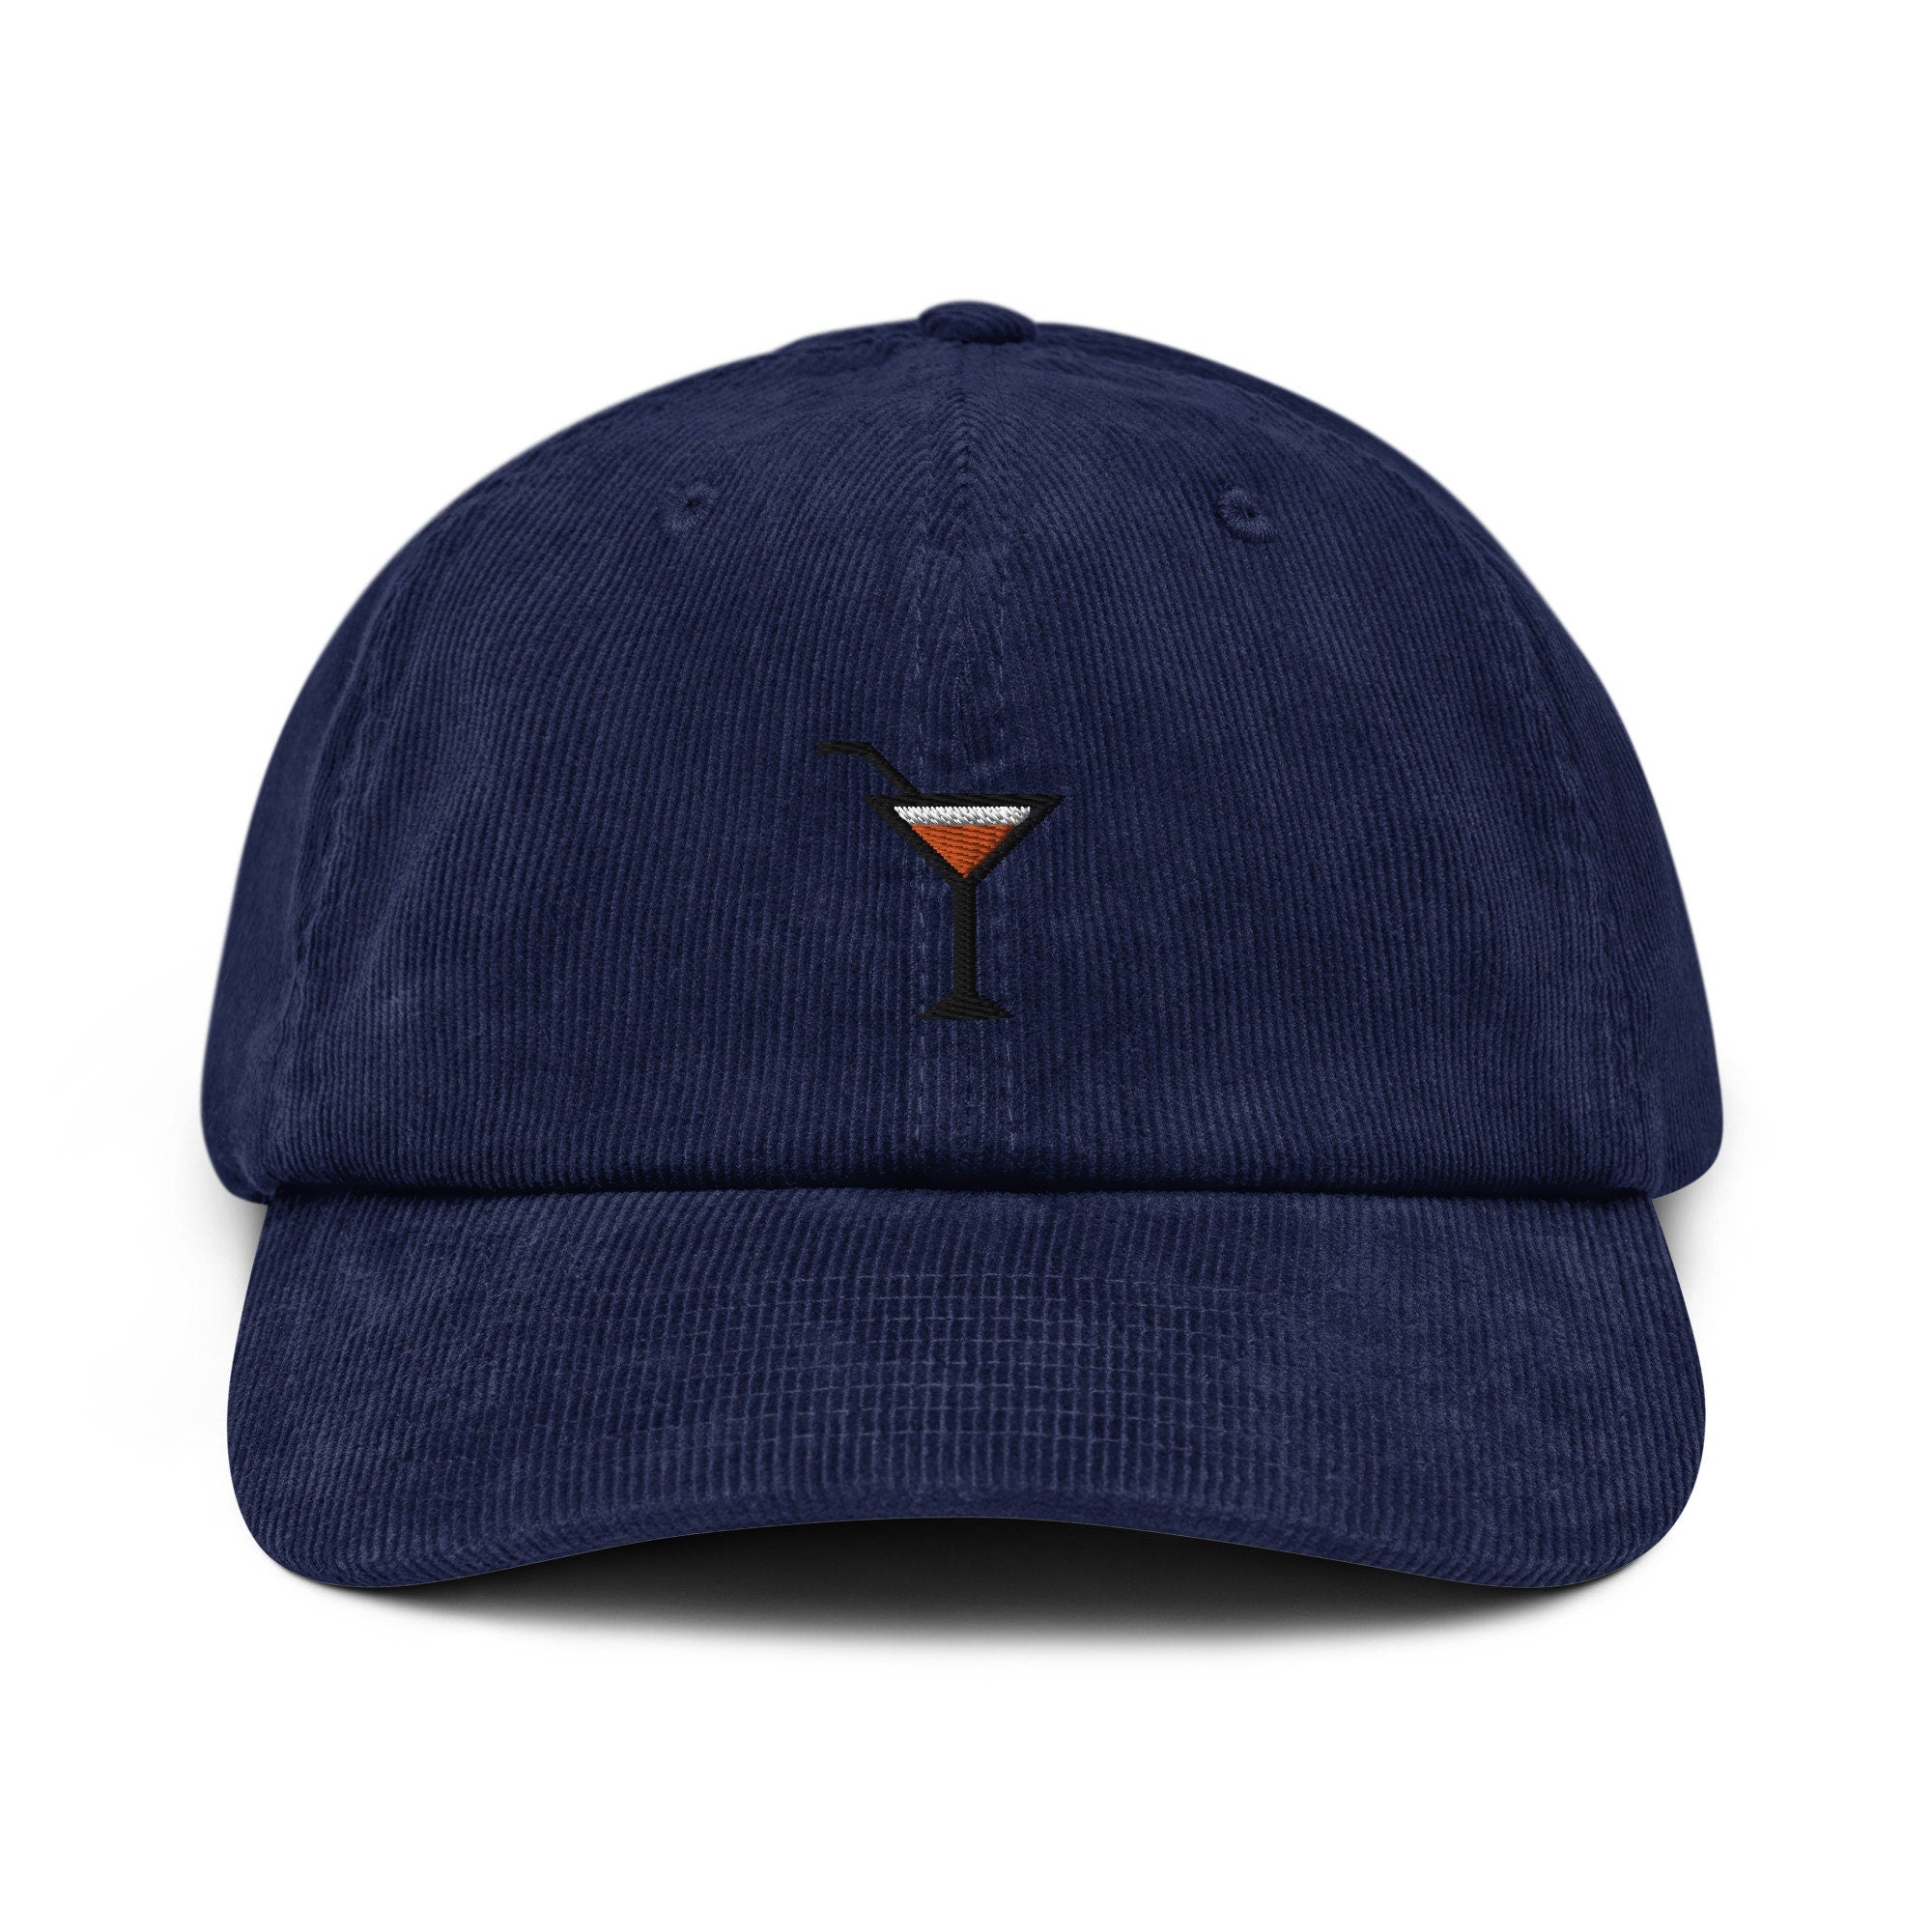 Cocktail Corduroy Hat, Handmade Embroidered Corduroy Dad Cap - Multiple Colors